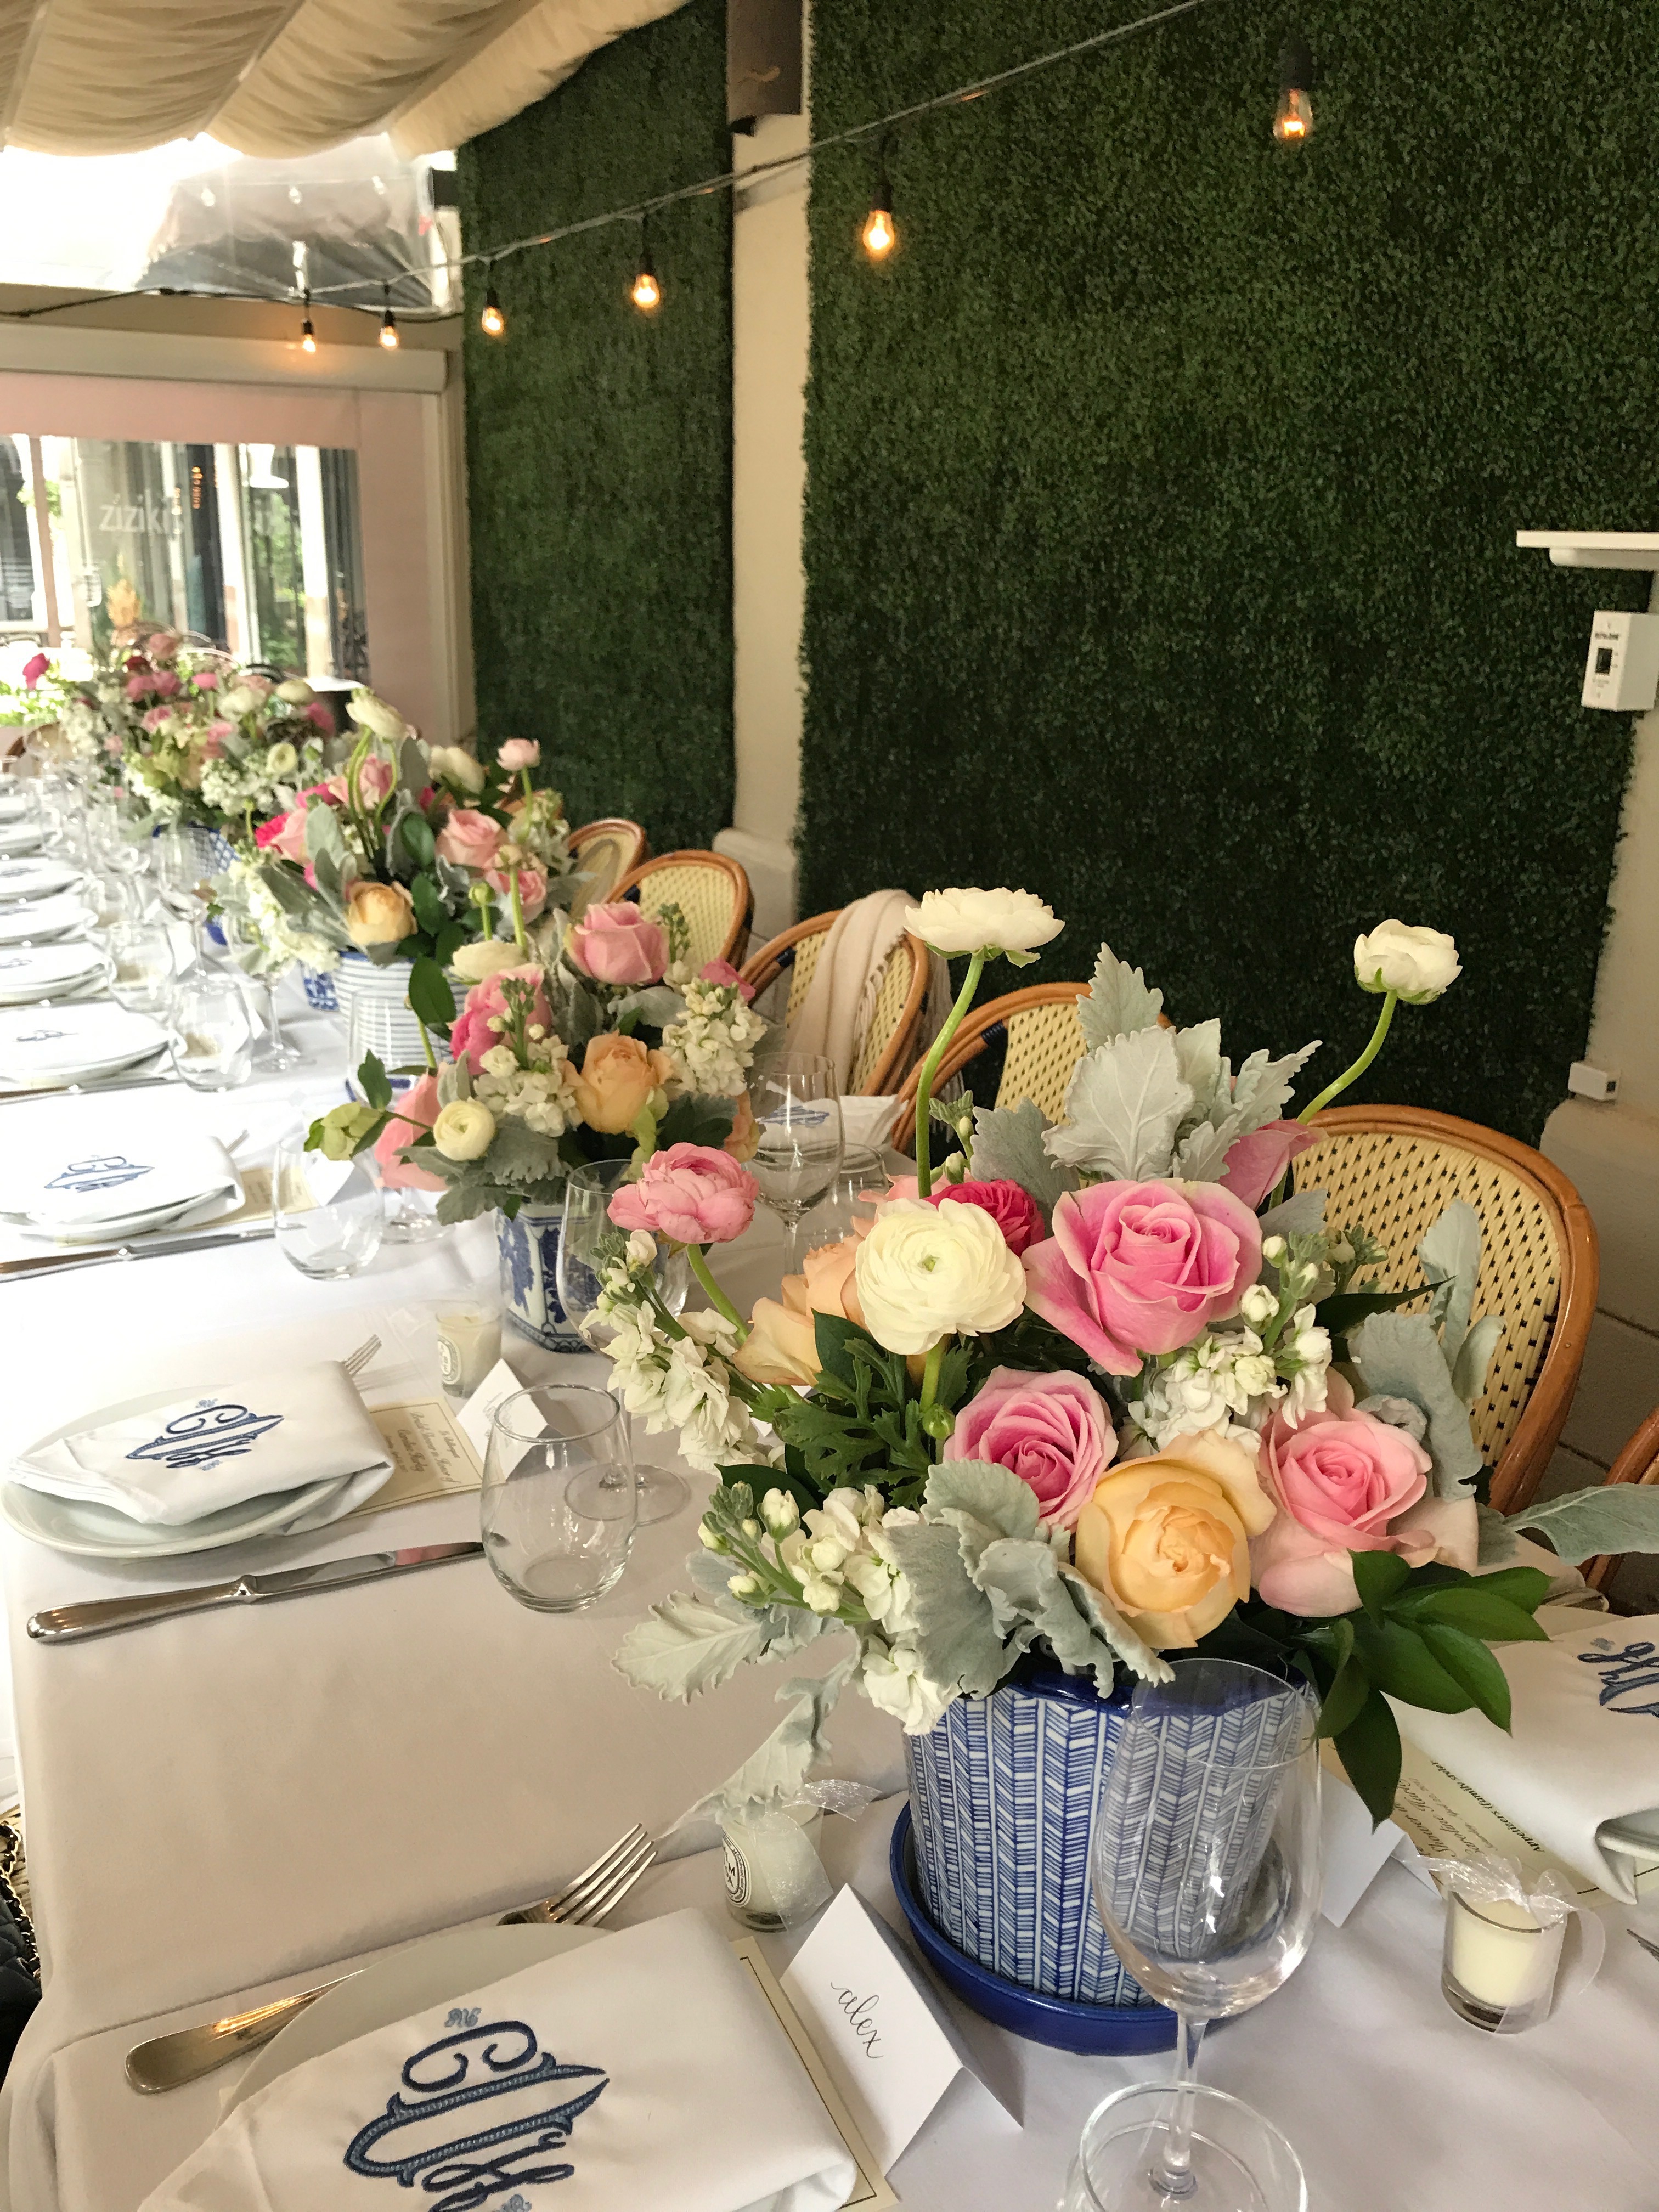 Bridal Shower by Christina Dandar for The Potted Boxwood 20